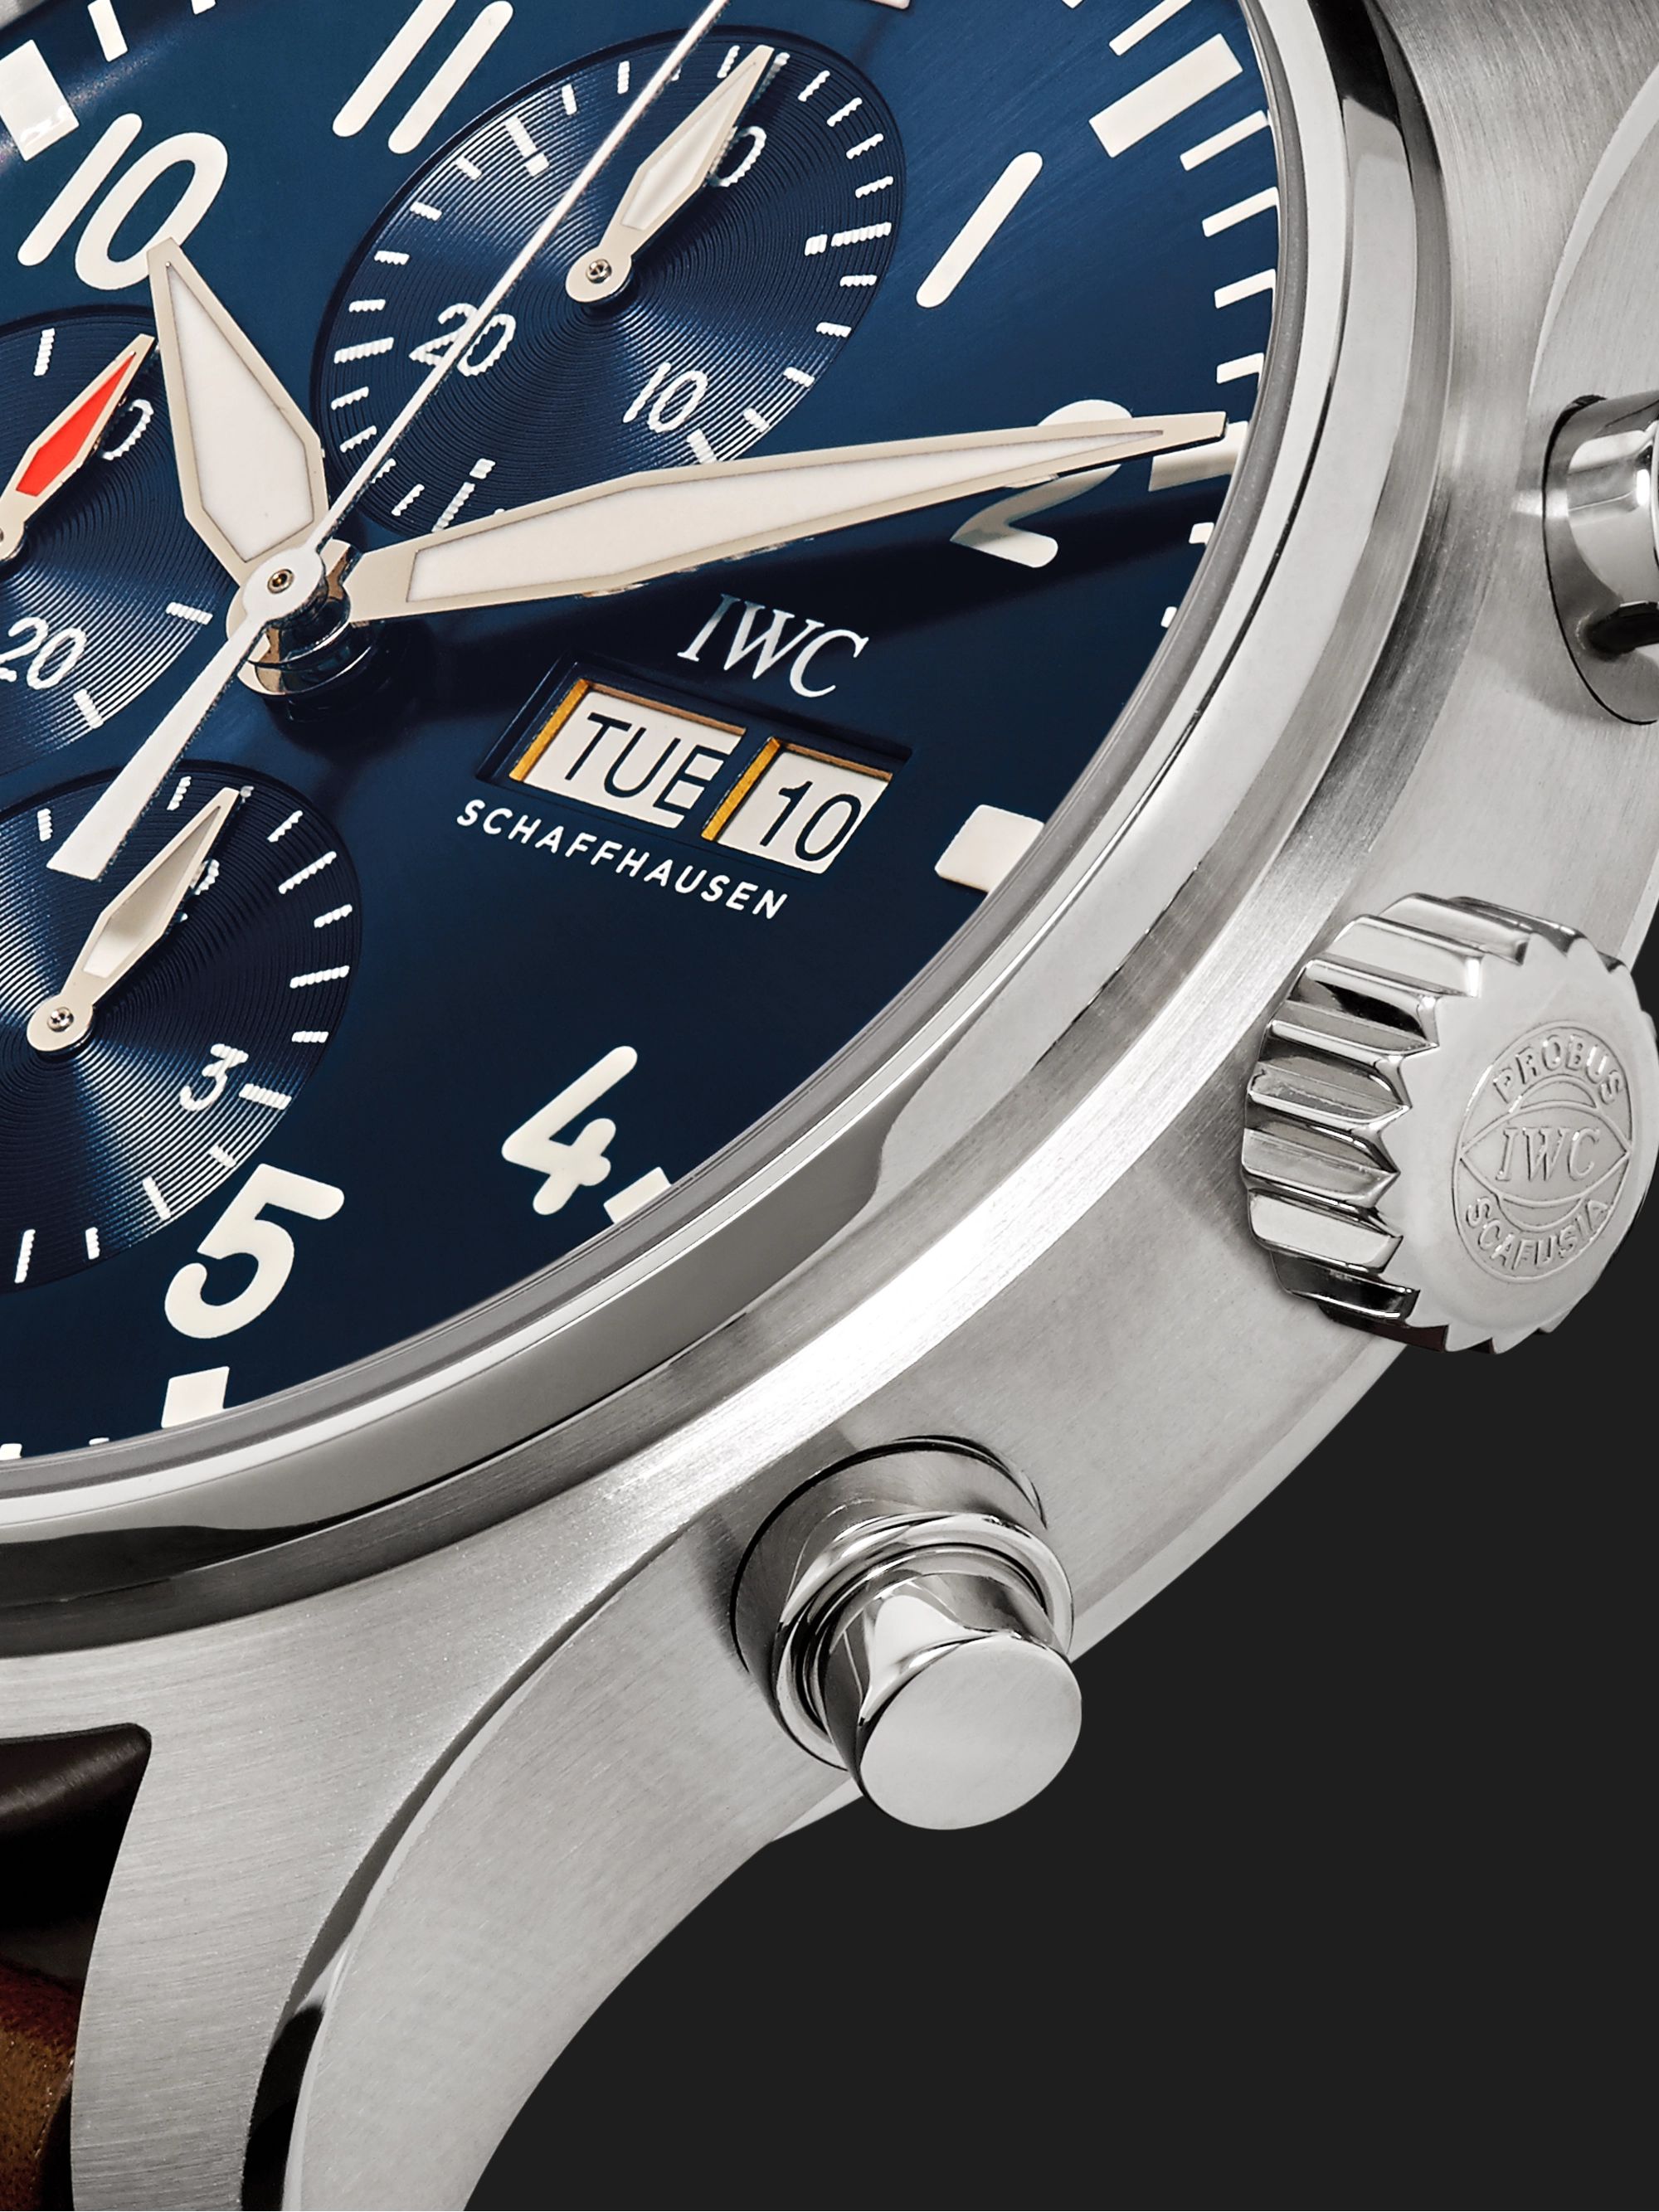 IWC SCHAFFHAUSEN Pilot's Le Petit Prince Edition Automatic Chronograph 43mm Stainless Steel and Leather Watch, Ref. No. IW377714